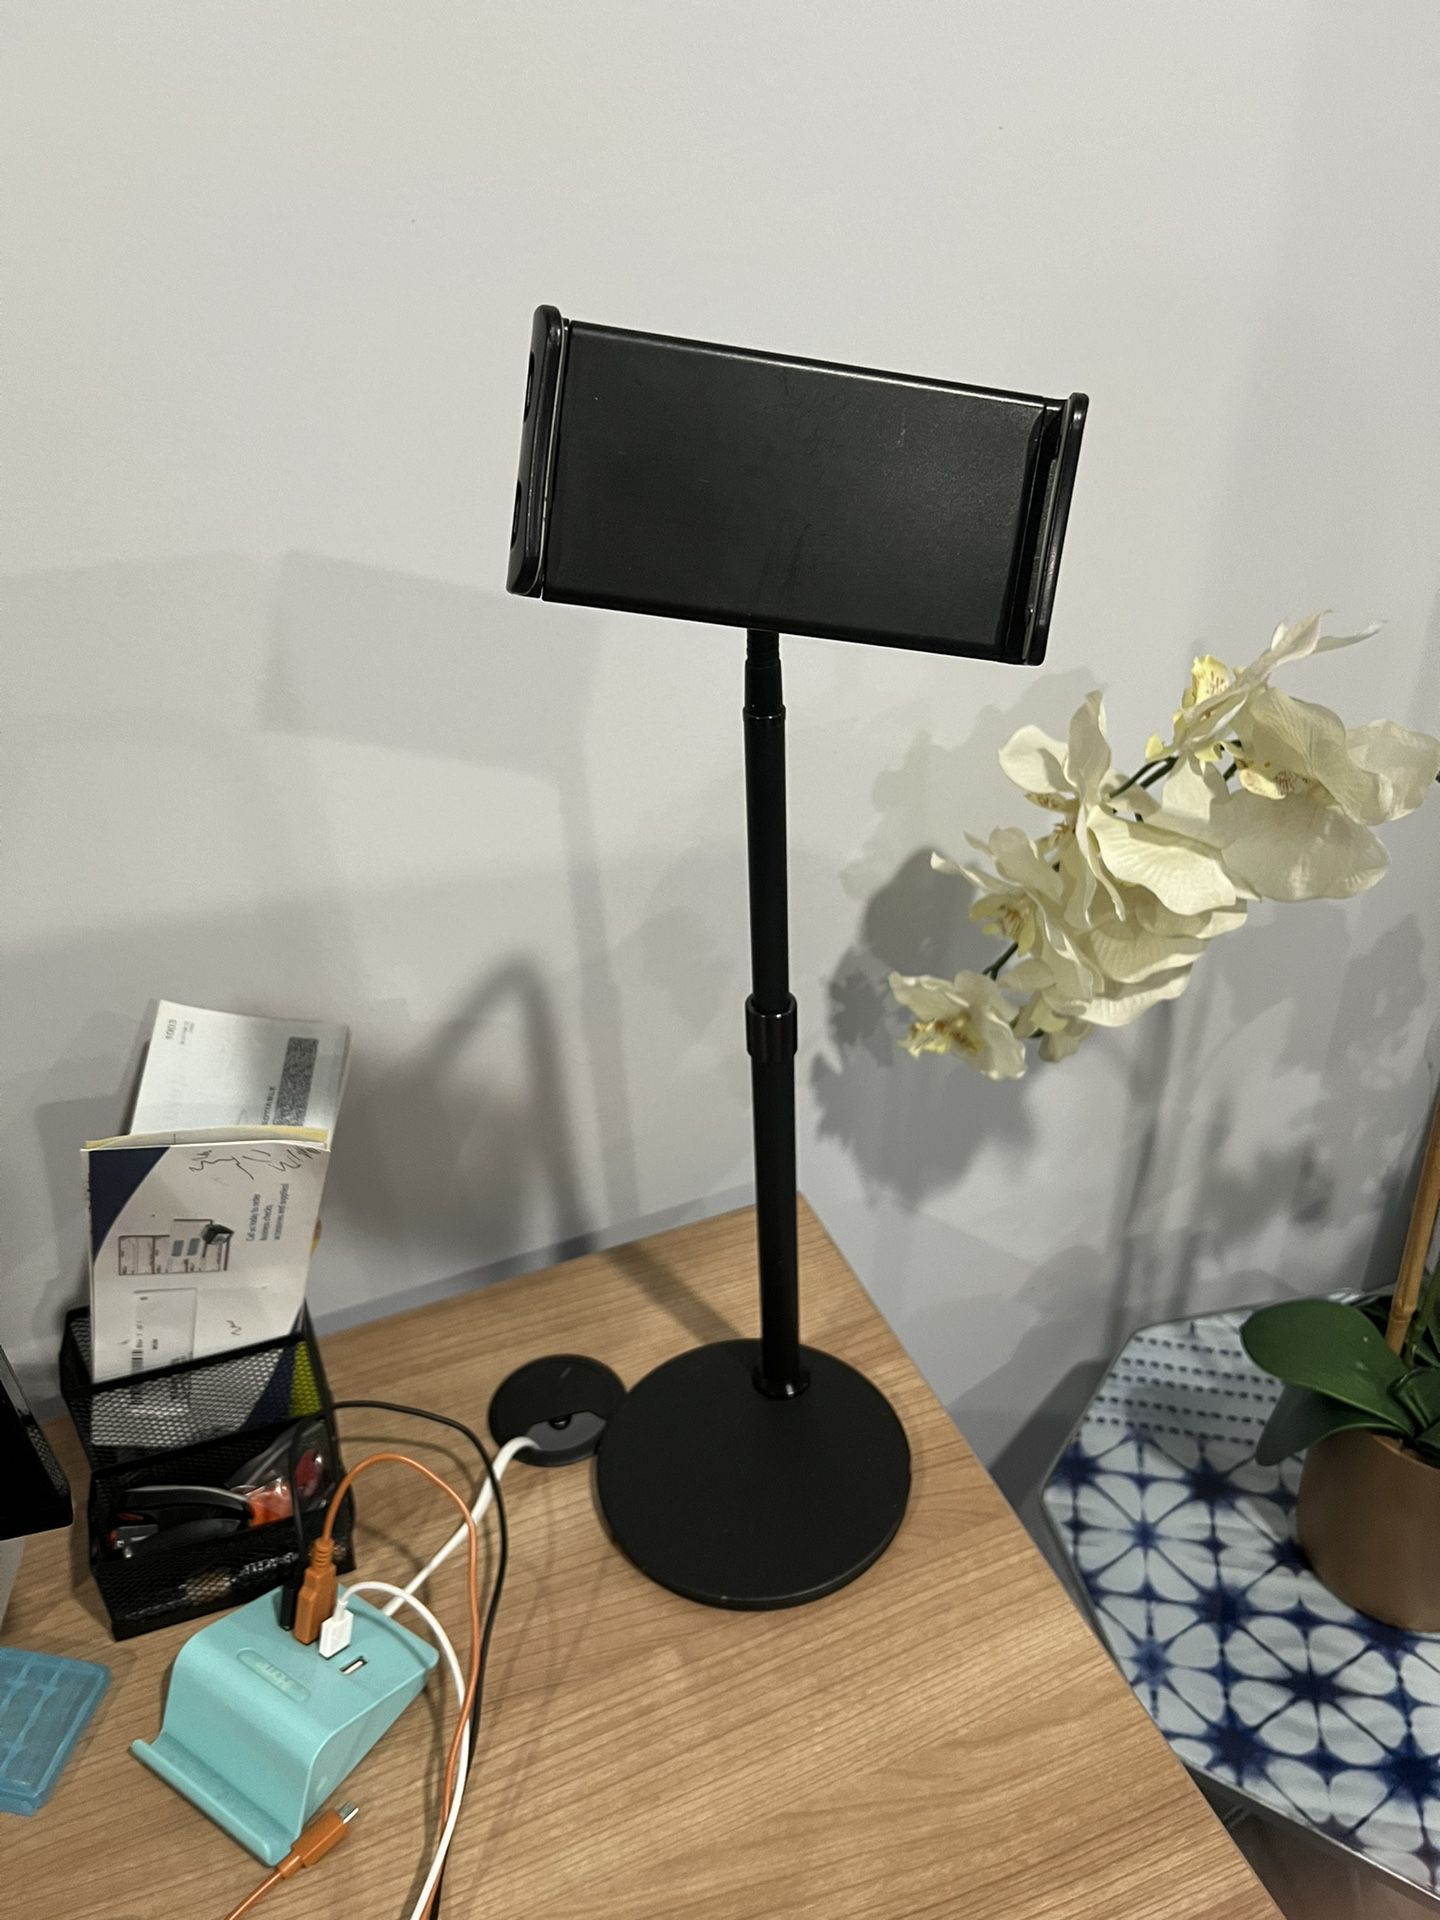 Mobile & iPAD Stand - Super Strong, Height Adjustable 